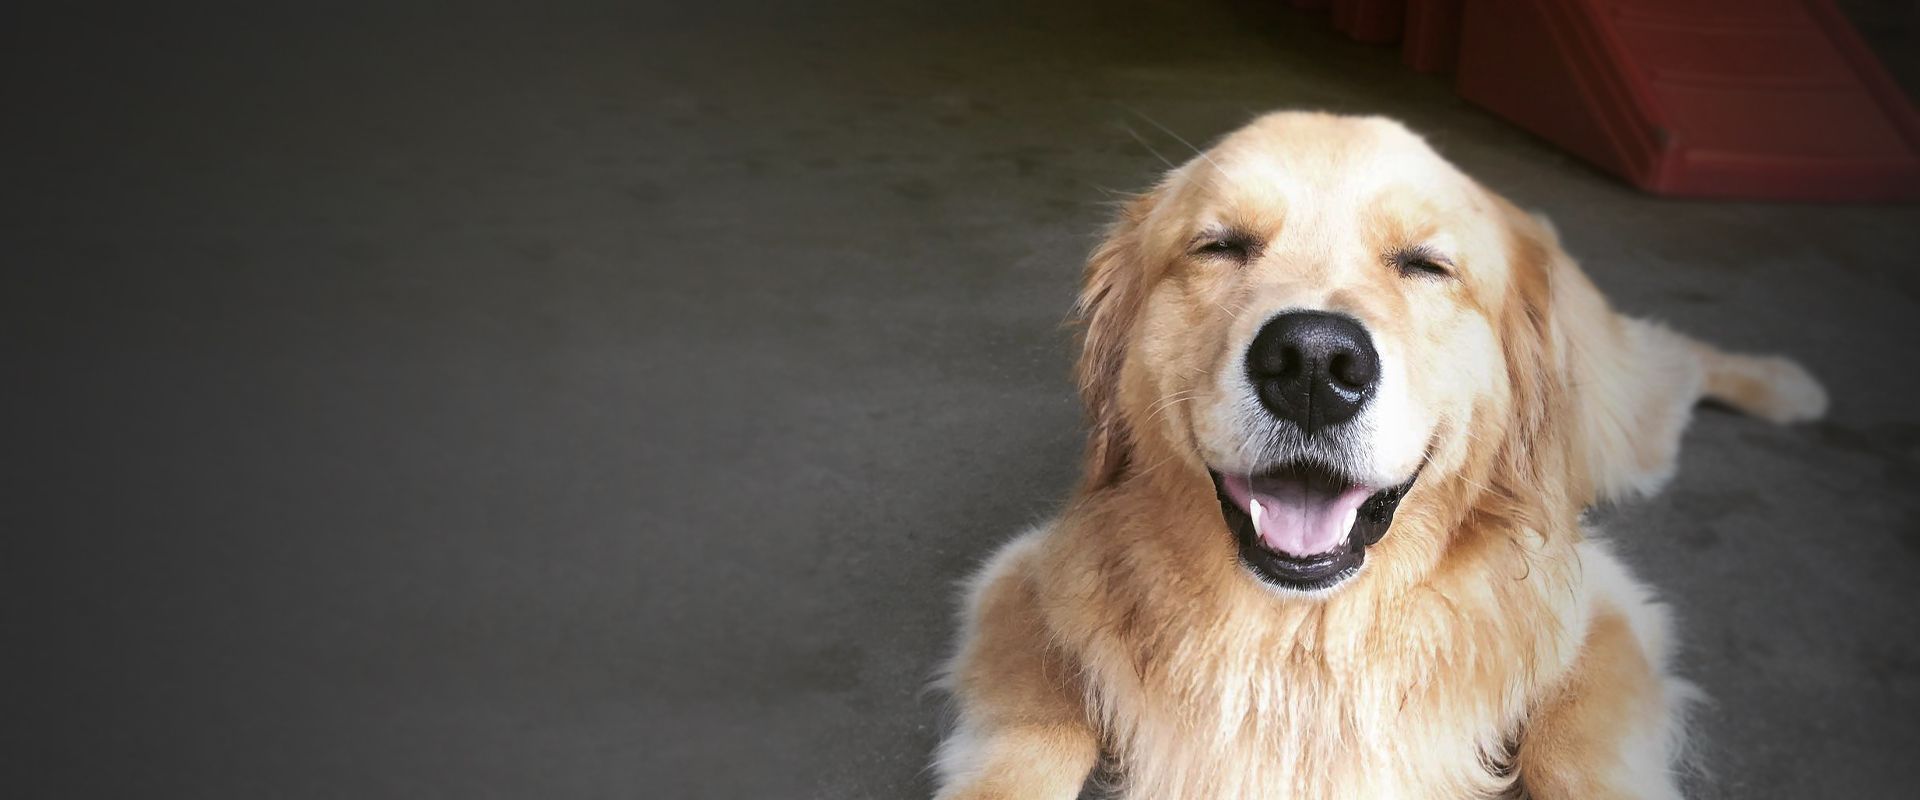 smiling golden retriever dog lying on the floor at k-9 coach daycare